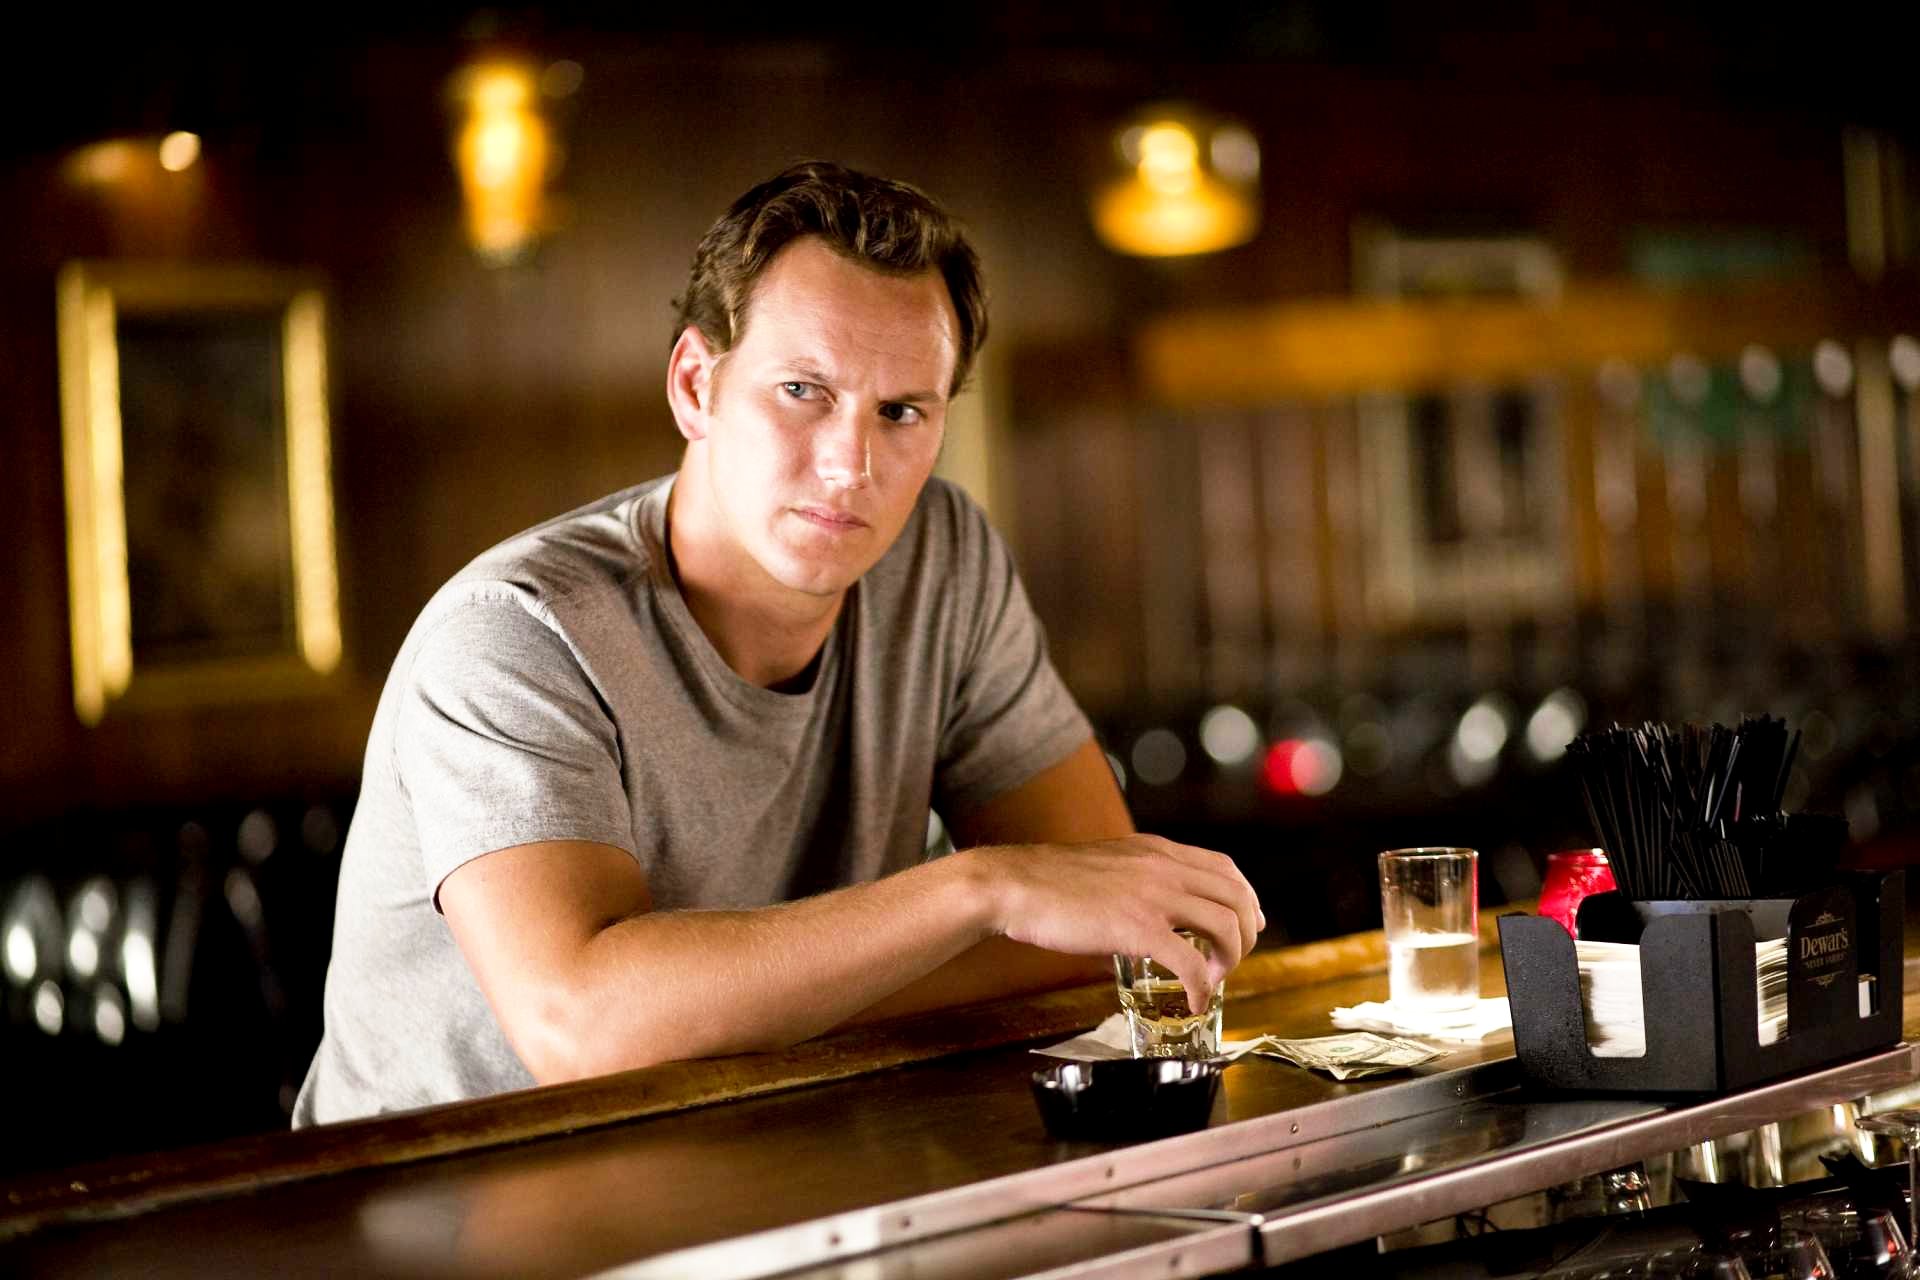 Patrick Wilson stars as Chris Mattson in Screen Gems' Lakeview Terrace (2008). Photo credit by Chuck Zlotnick.